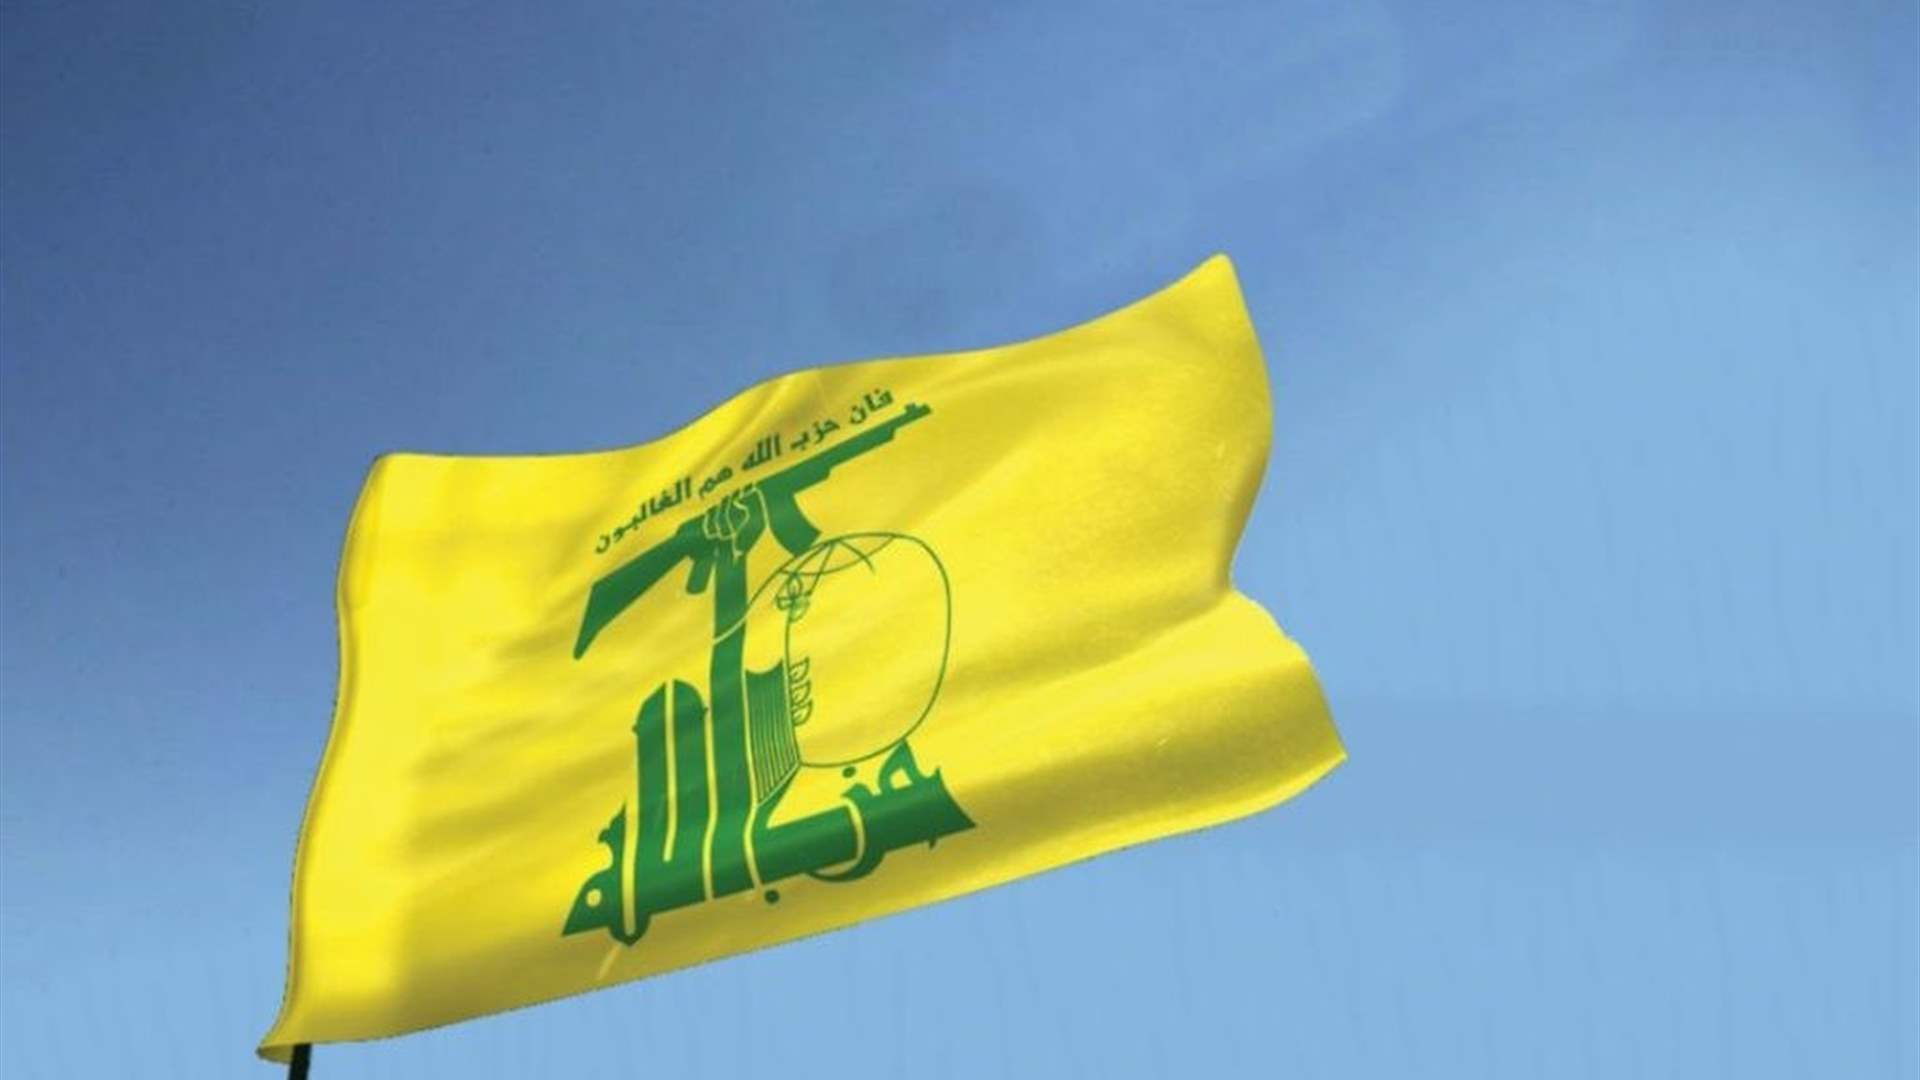 Hezbollah: Let tomorrow, Wednesday, be an unprecedented day of anger against the enemy and its crimes